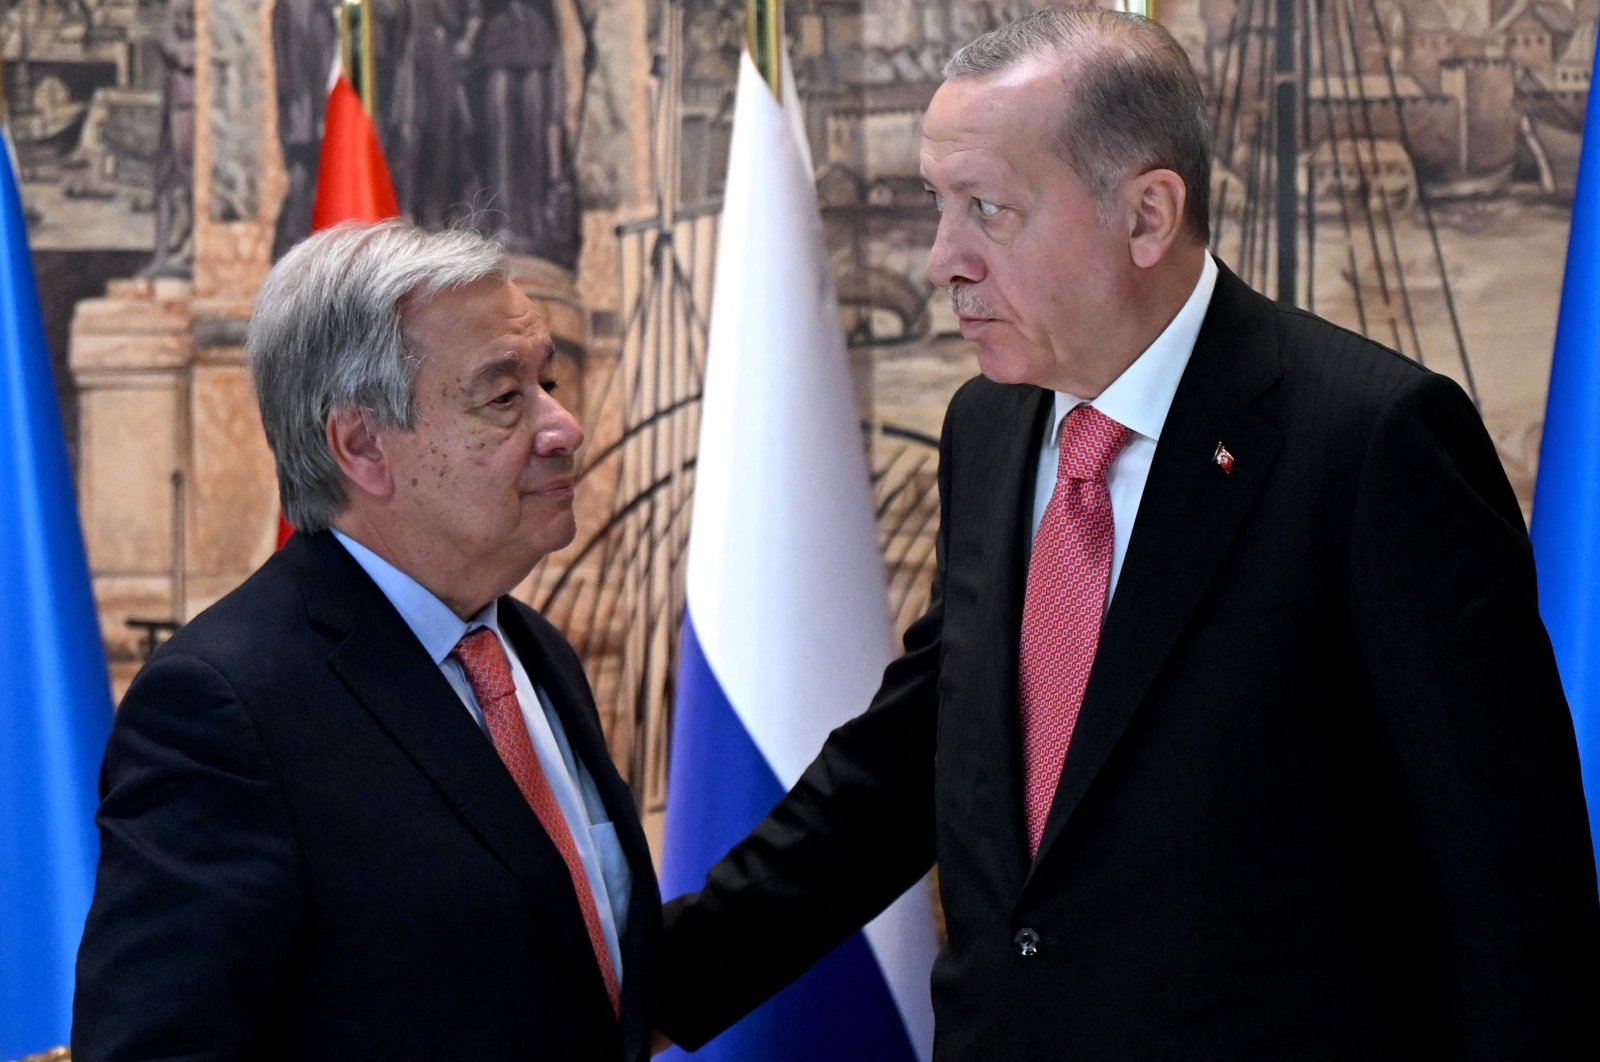 President Recep Tayyip Erdoğan (R) and U.N. Secretary-General Antonio Guterres speak after the signature ceremony of the initiative on the safe transportation of grain and foodstuffs from Ukrainian ports, in Istanbul, Turkey, July 22, 2022. (AFP Photo)